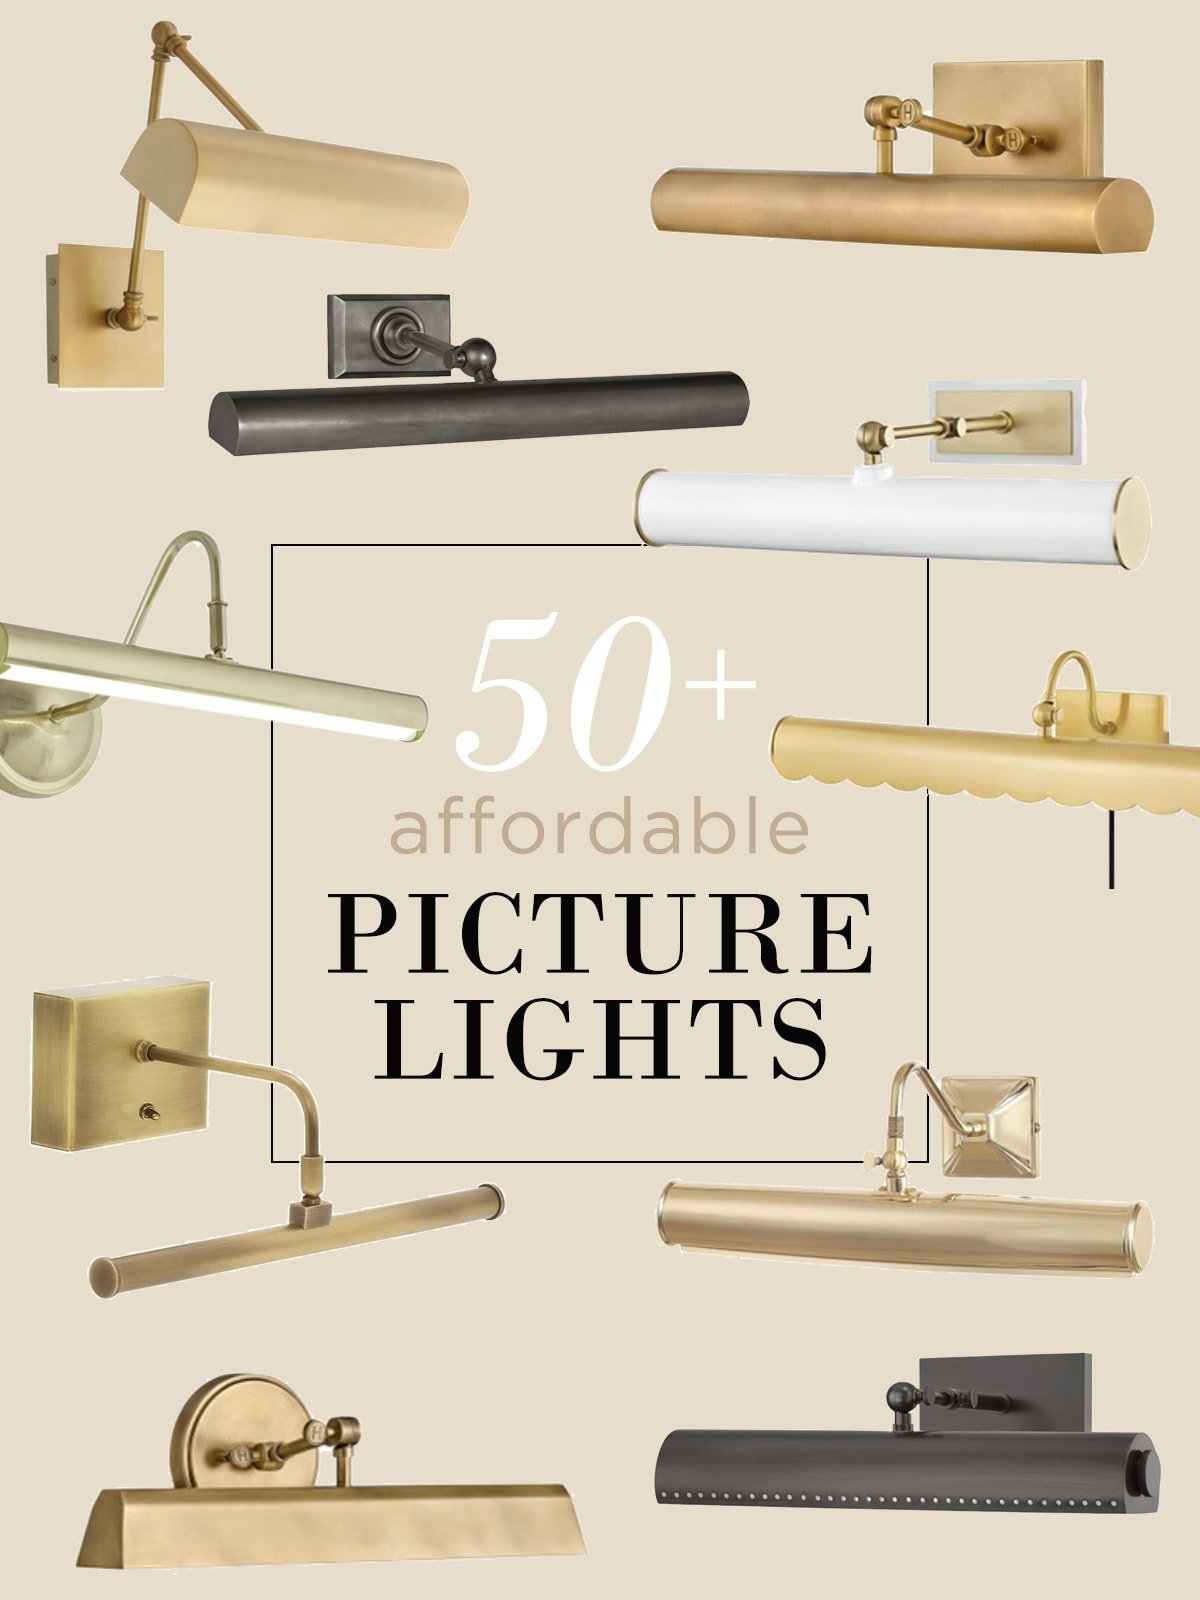 Affordable picture light roundup and guide